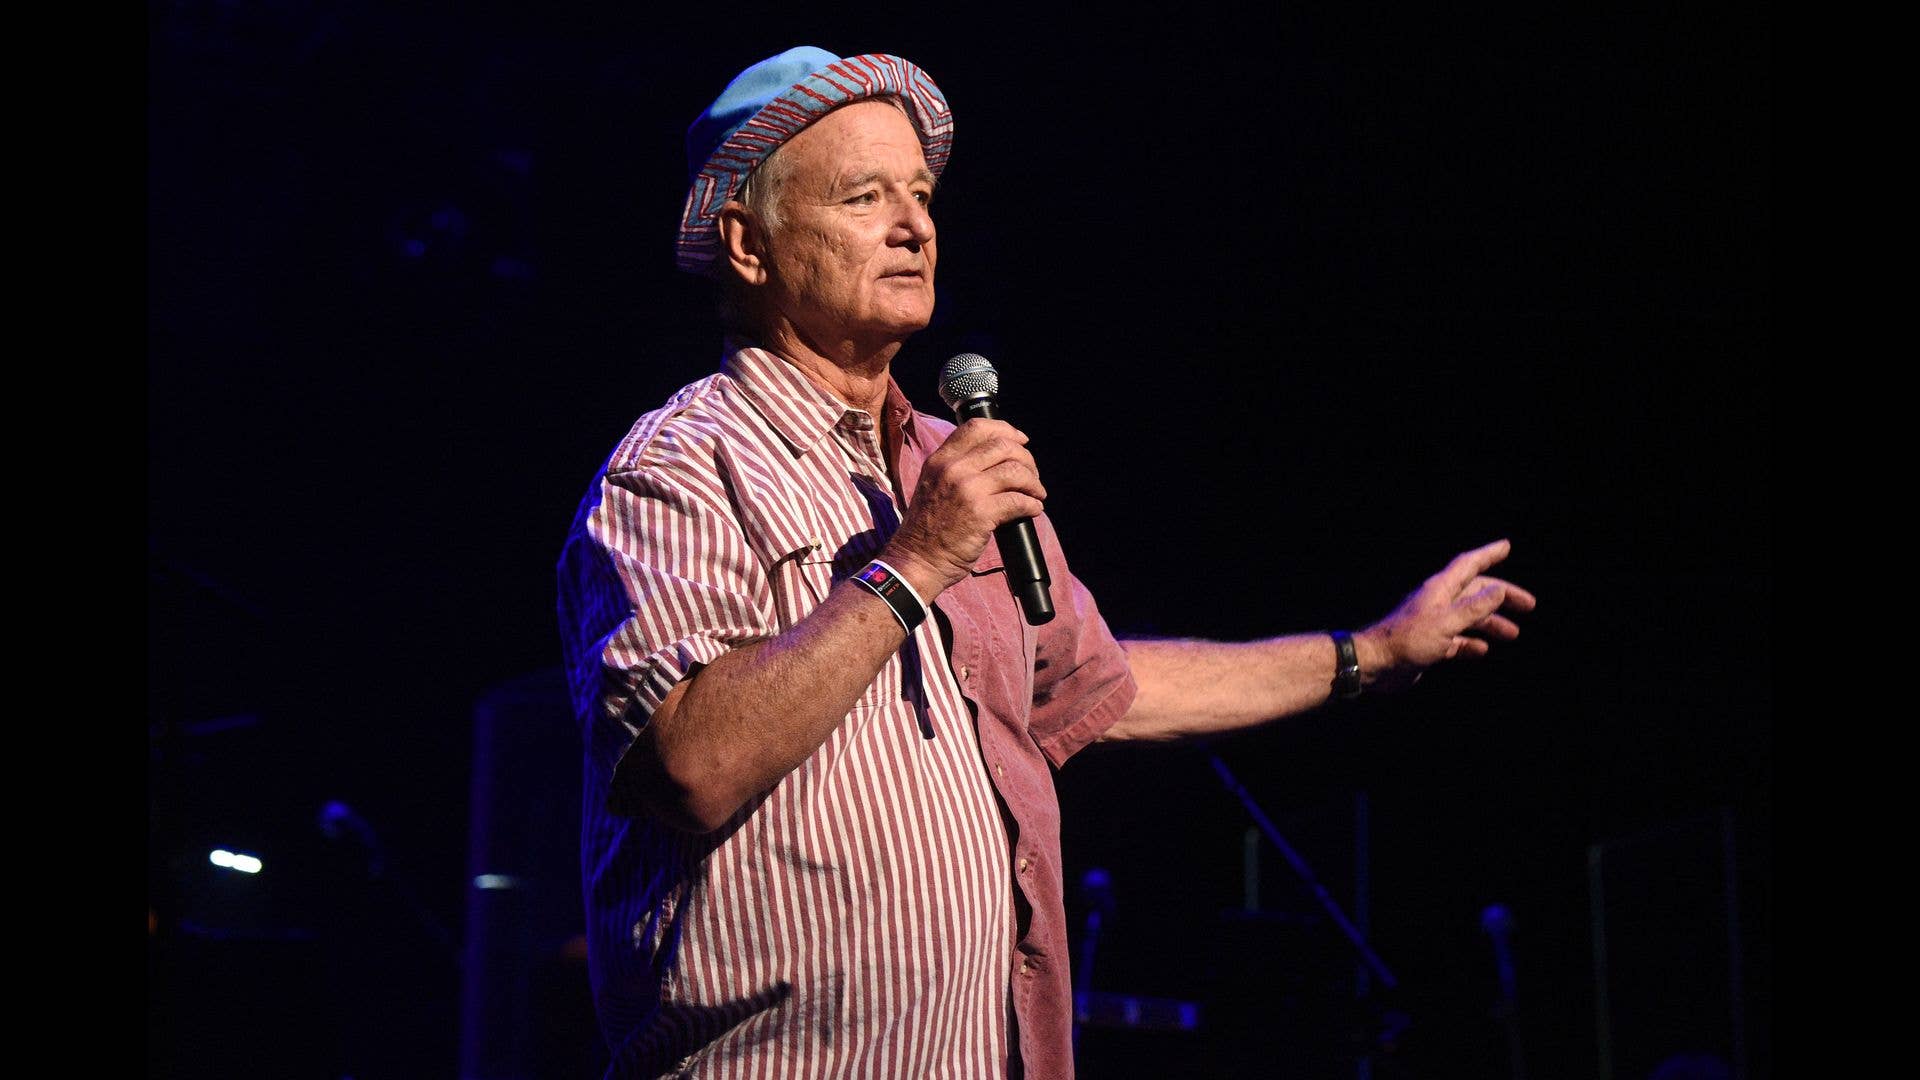 Cubs fan Bill Murray sings 'Take Me Out to the Ballgame' at Wrigley Field 